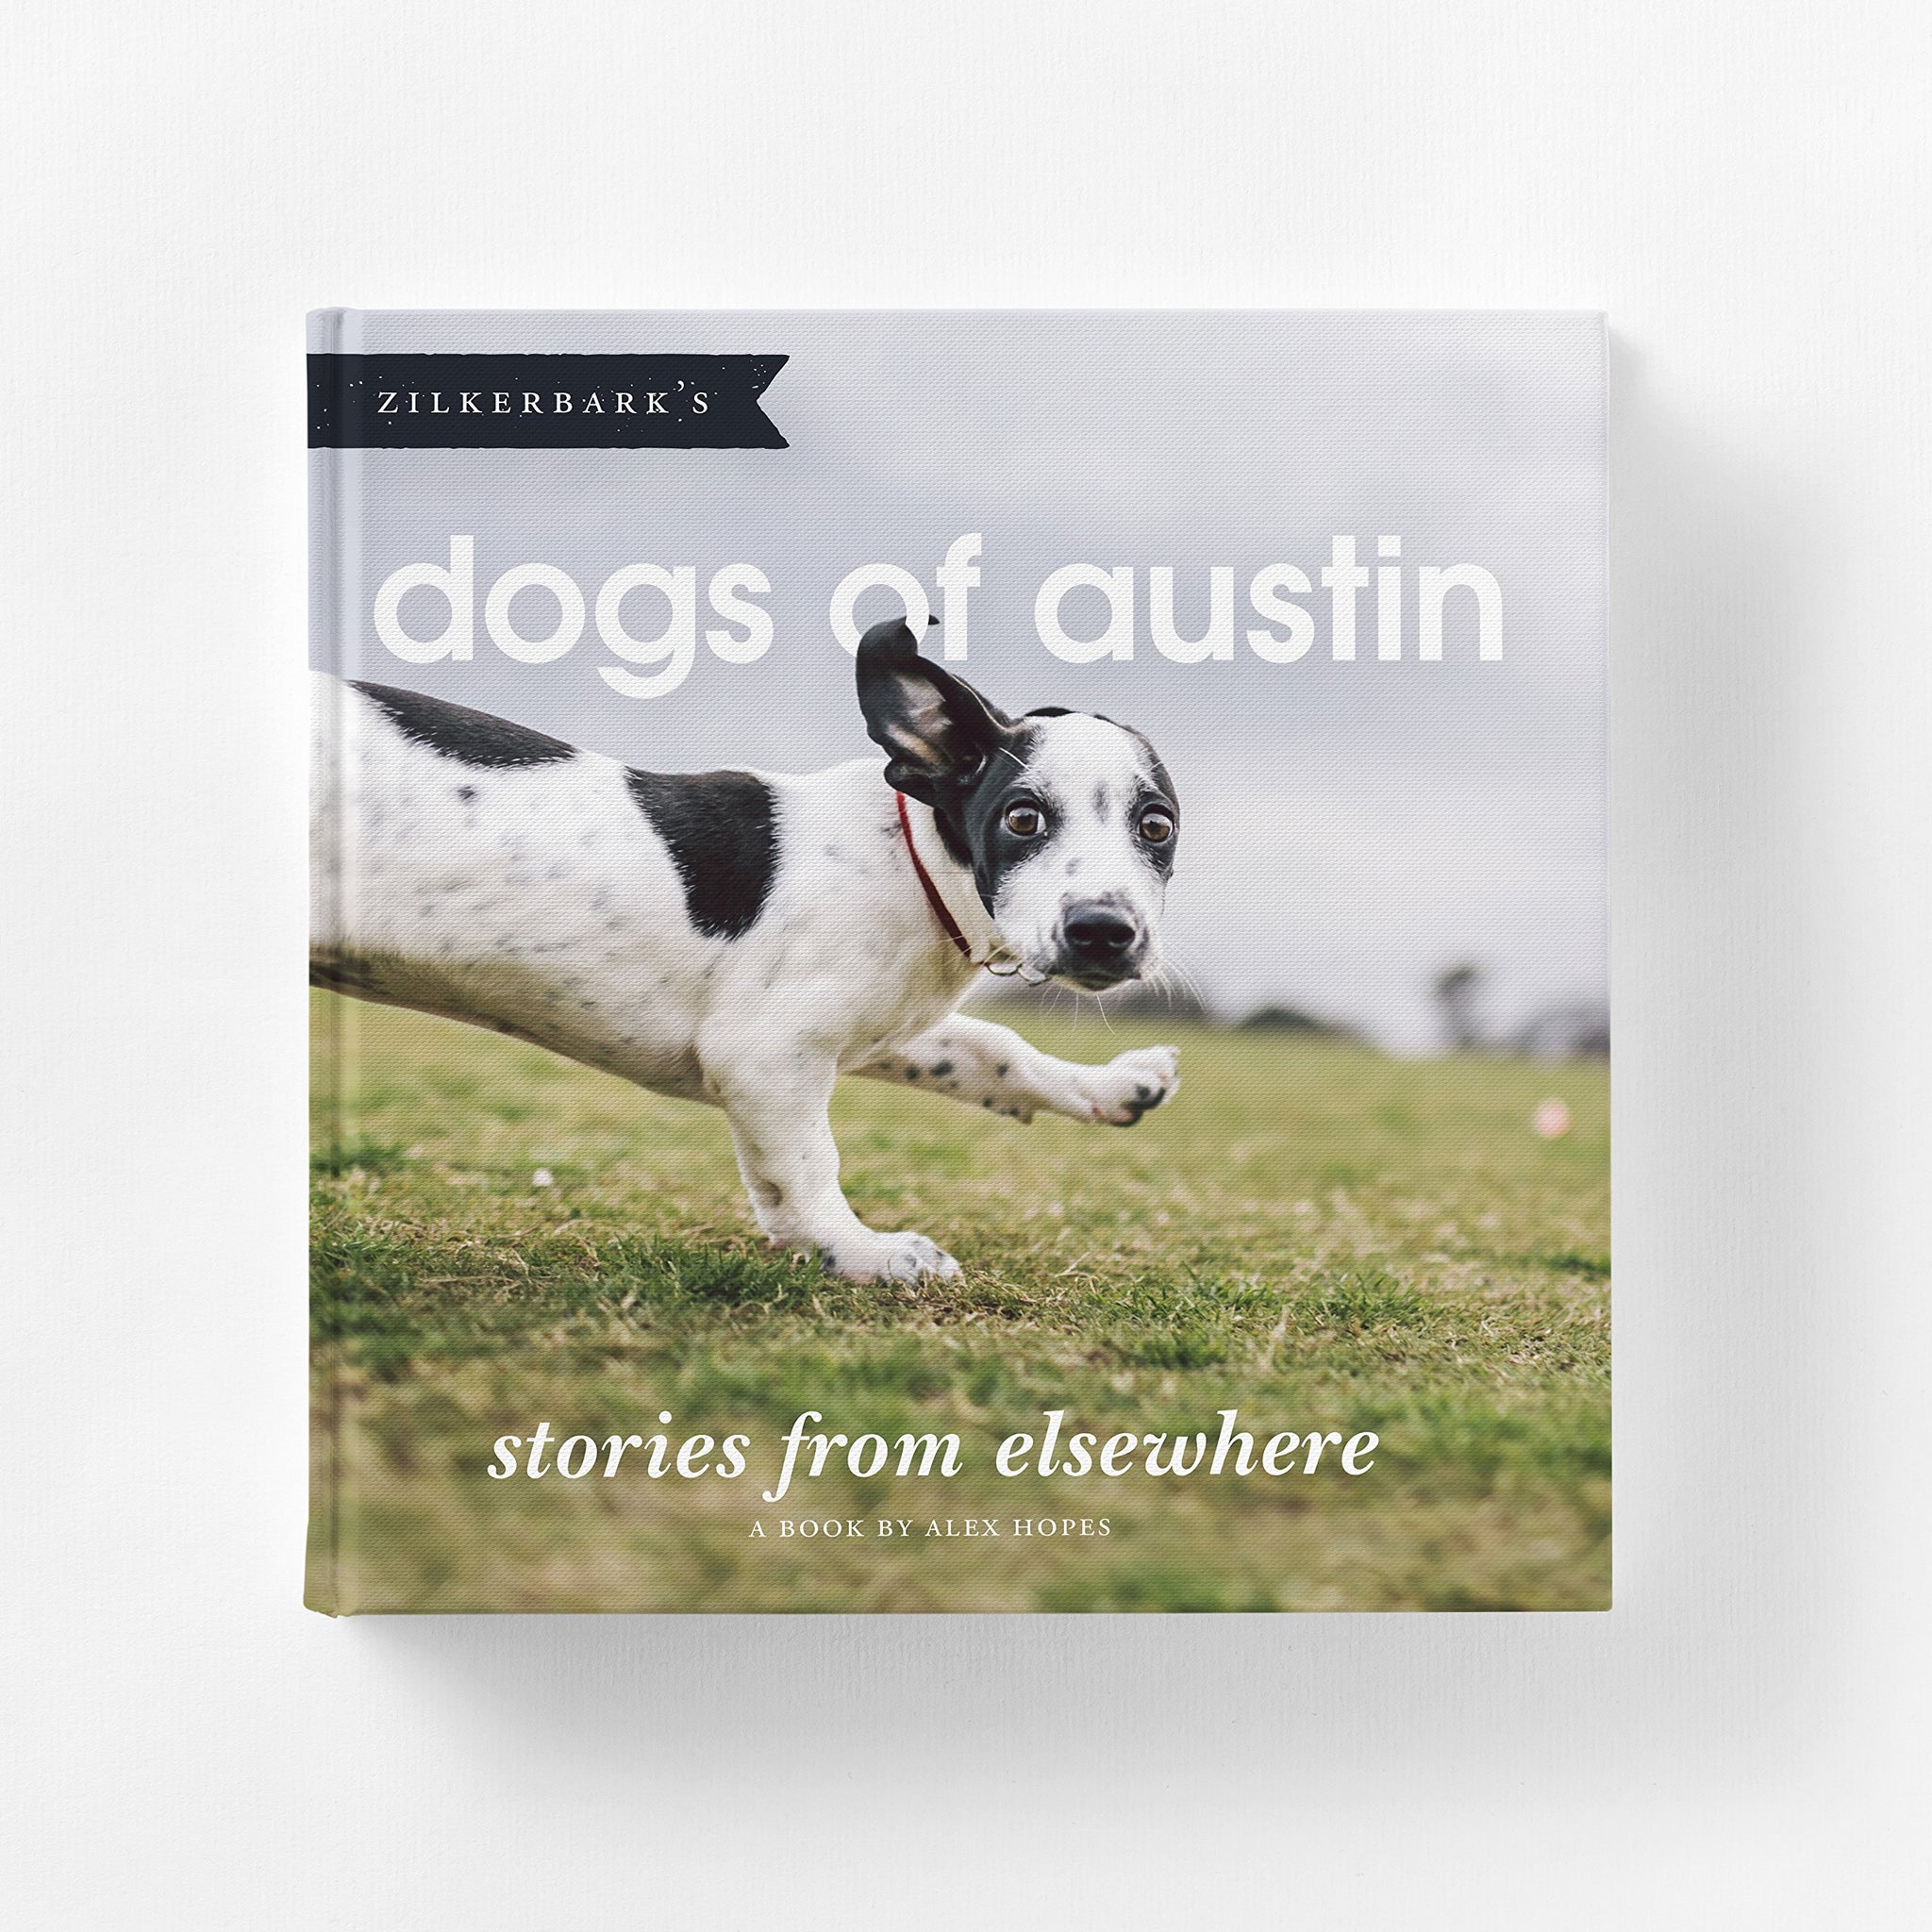 Dogs of Austin: Stories from Elsewhere